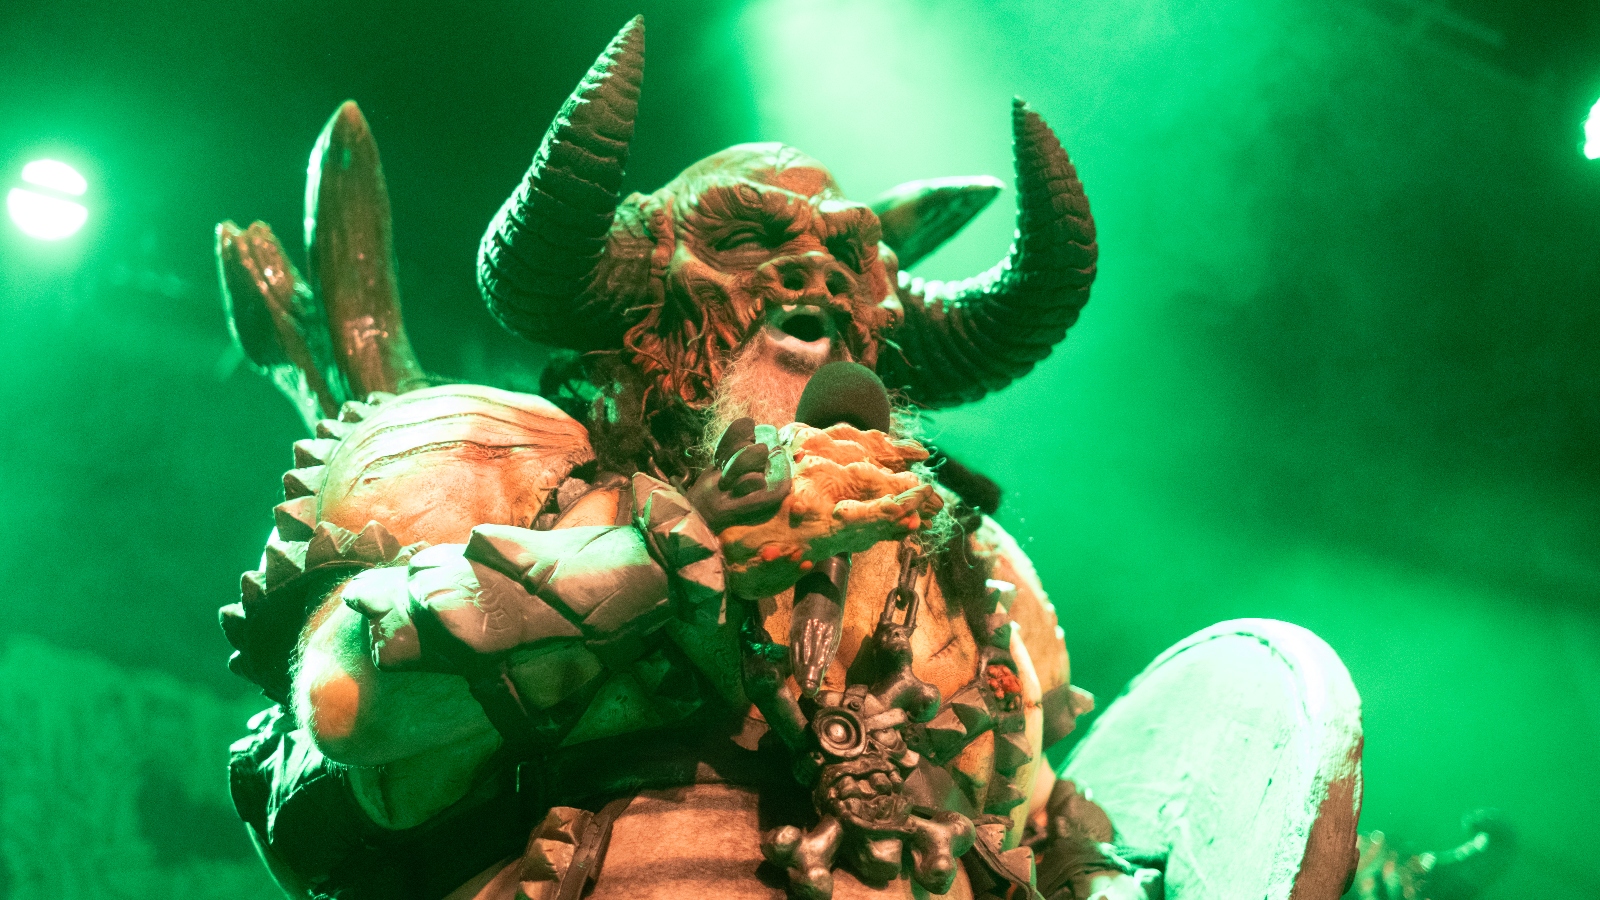 GWAR covers the song “I’m Just Ken” from the “Barbie” movie